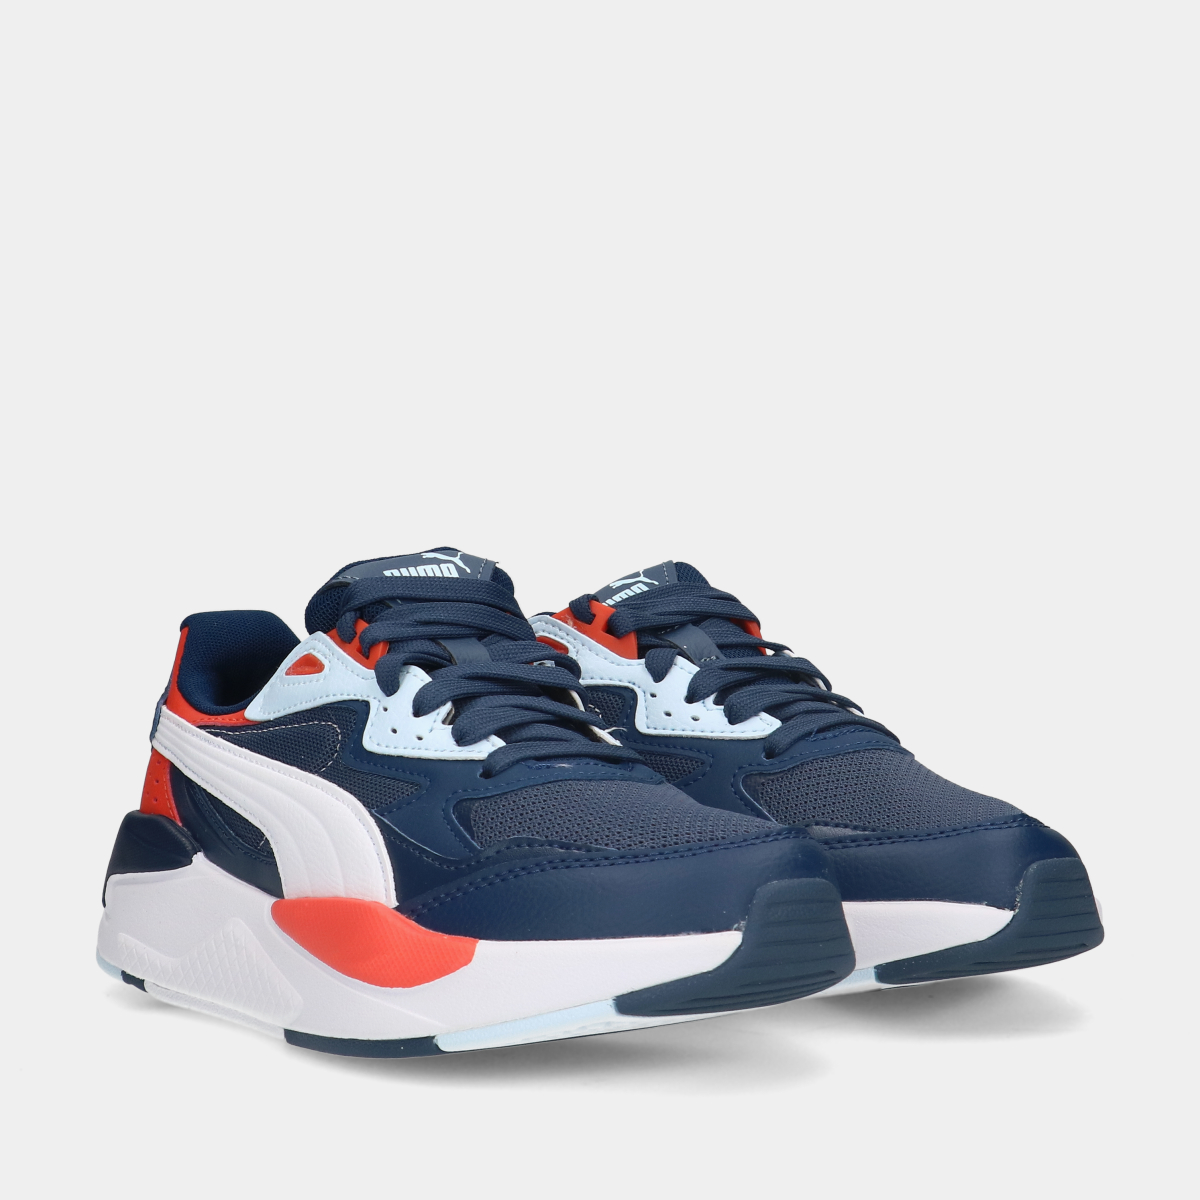 Puma X-Ray speed Inky Blue/White Persian kinder sneakers.